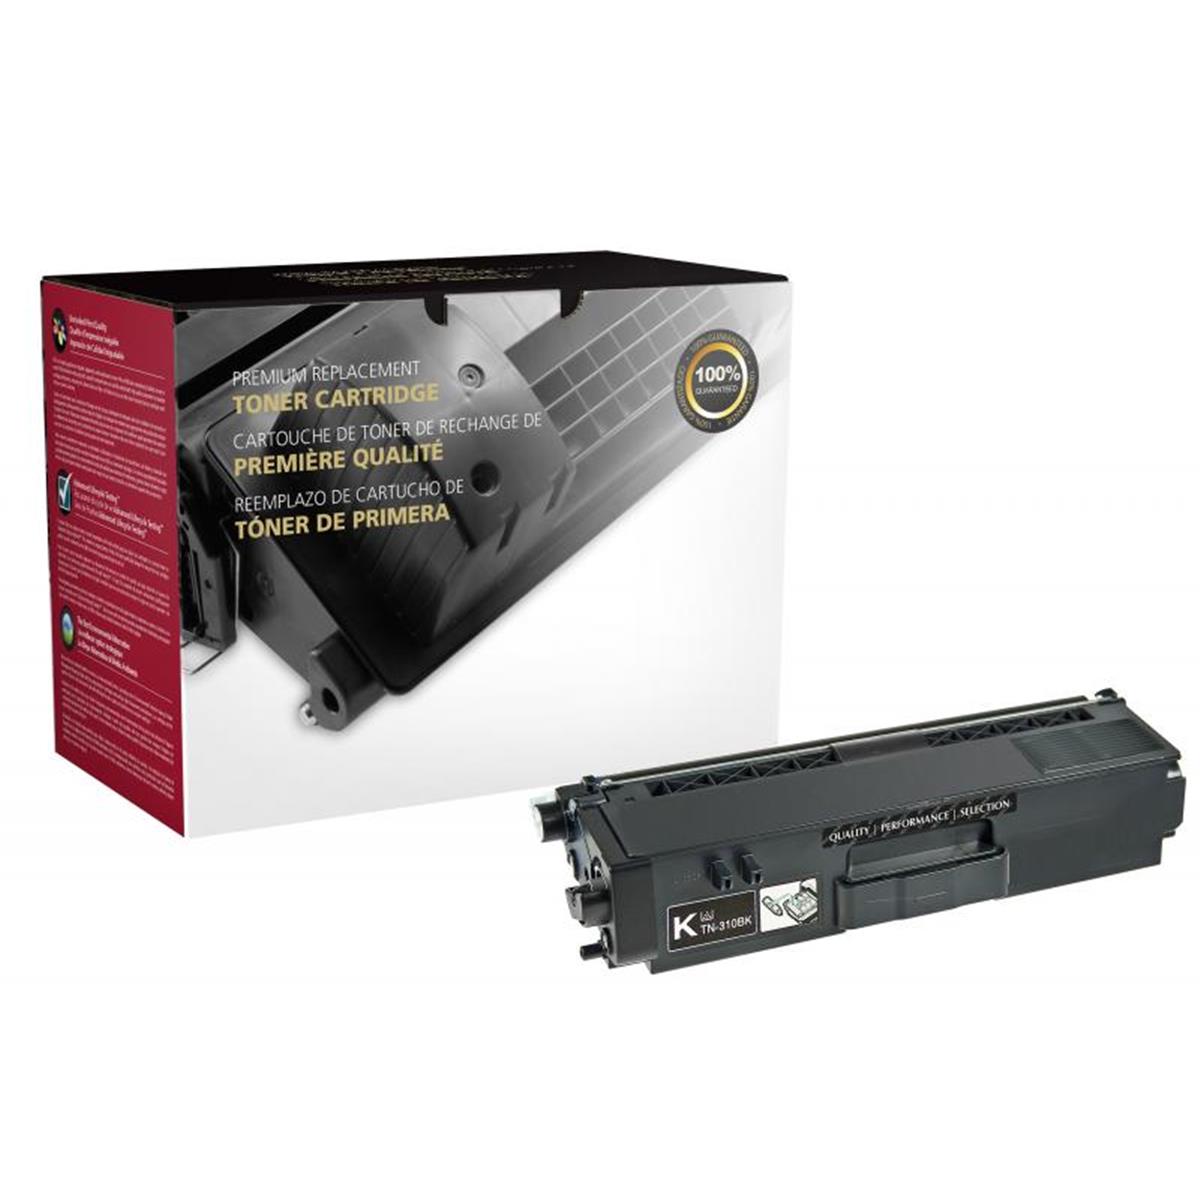 Picture of Brother 200592 Black Toner Cartridge for TN310